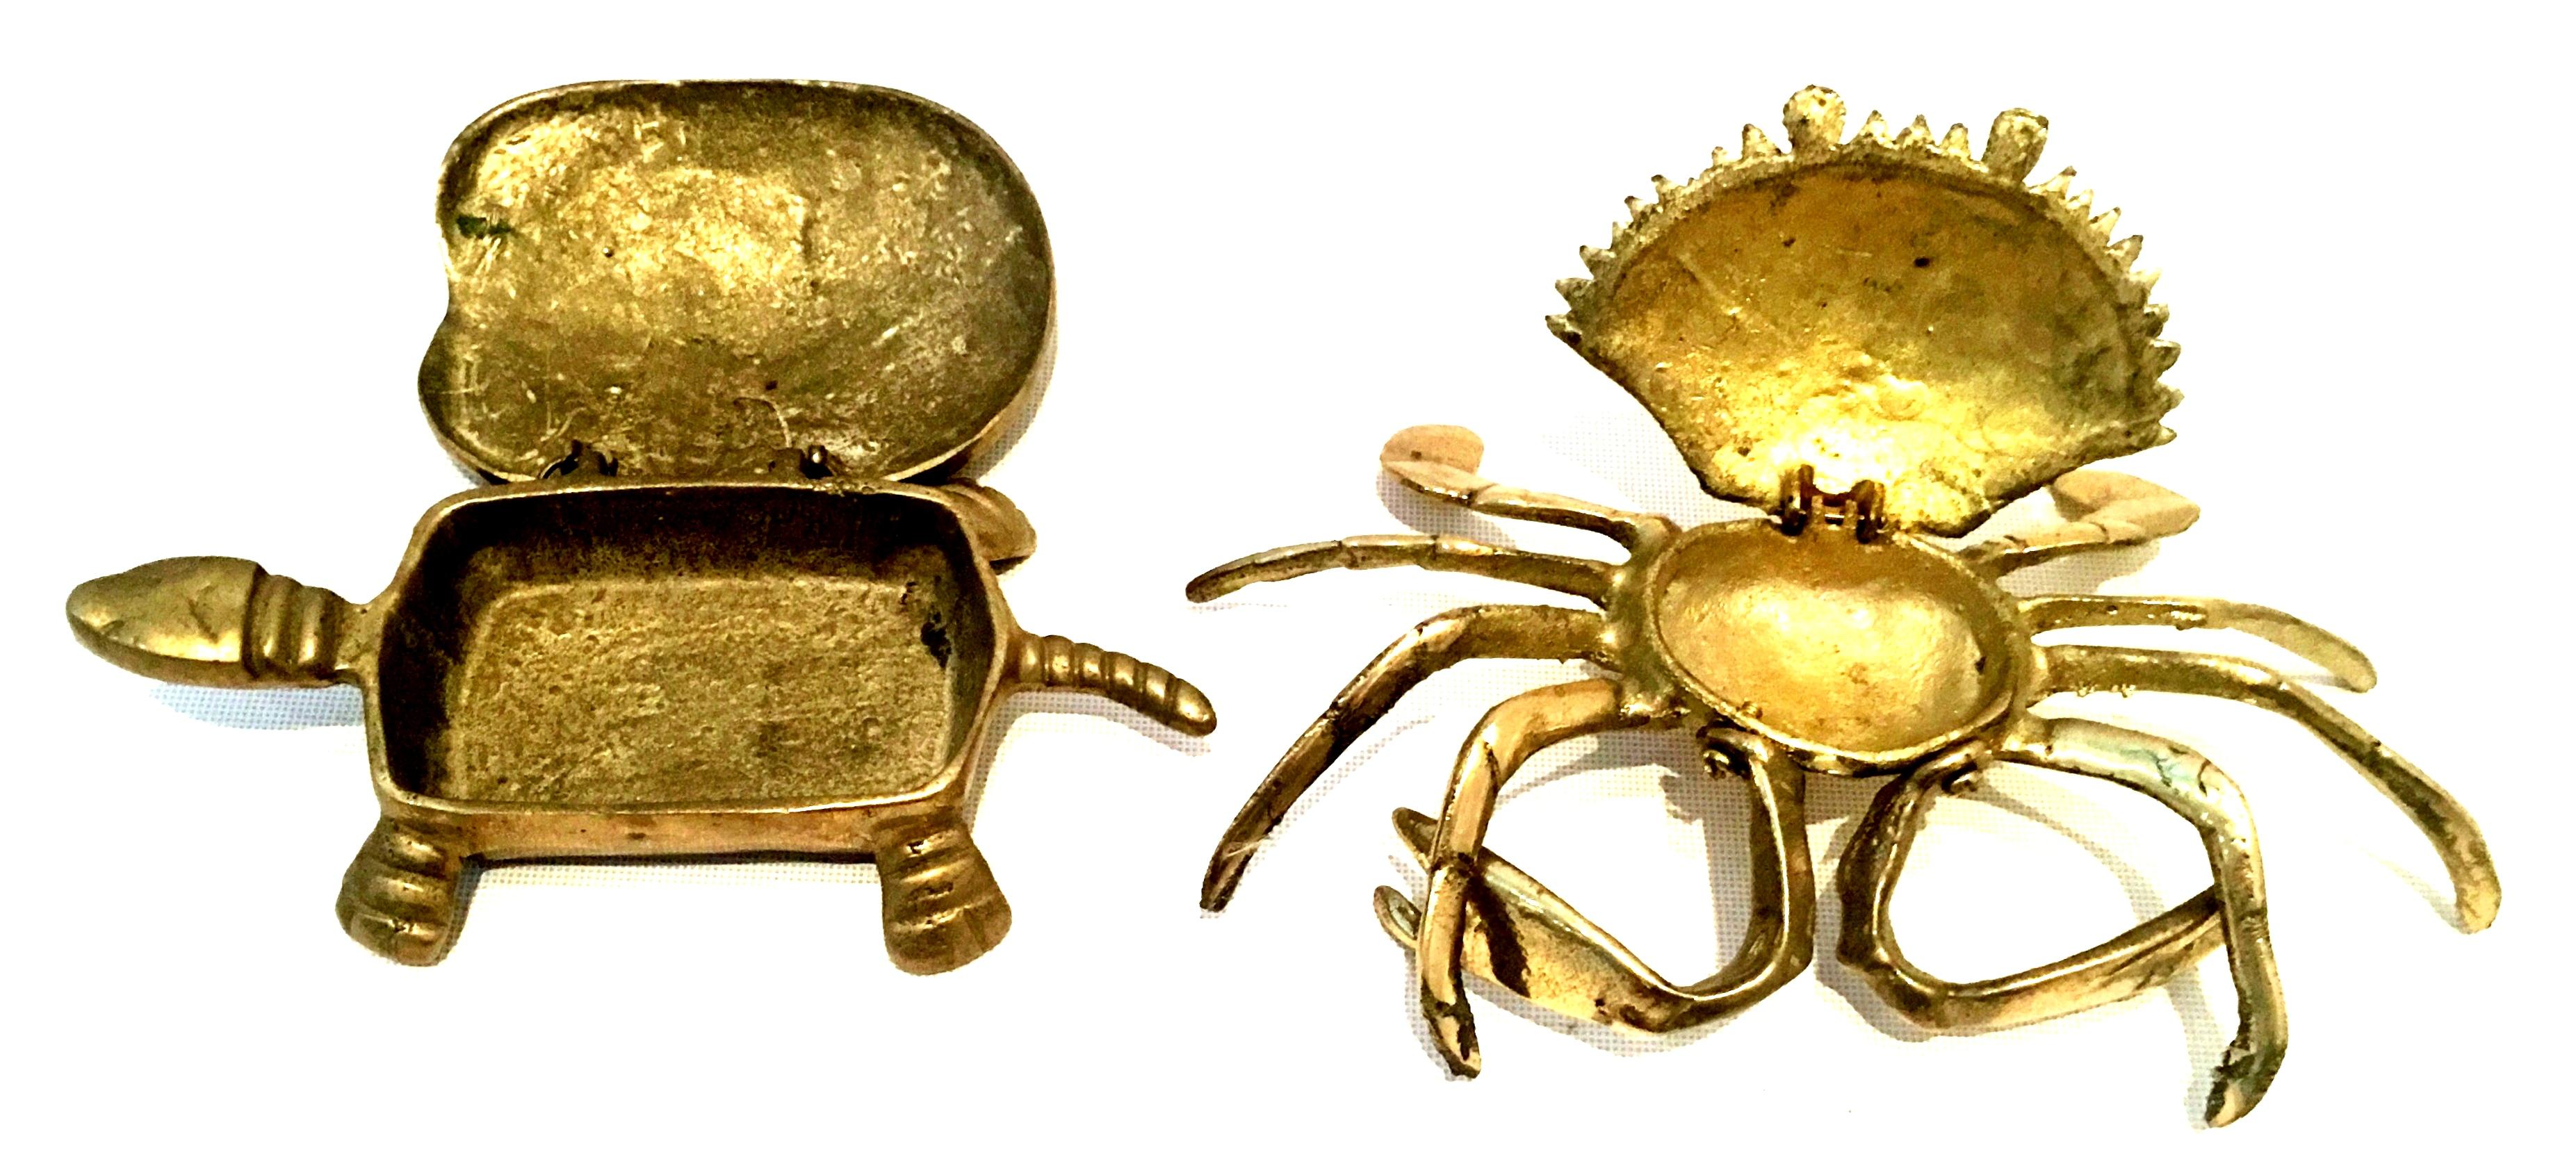 20th century set of two solid brass turtle & crab hinge boxes.
Turtle box measures: 6.75